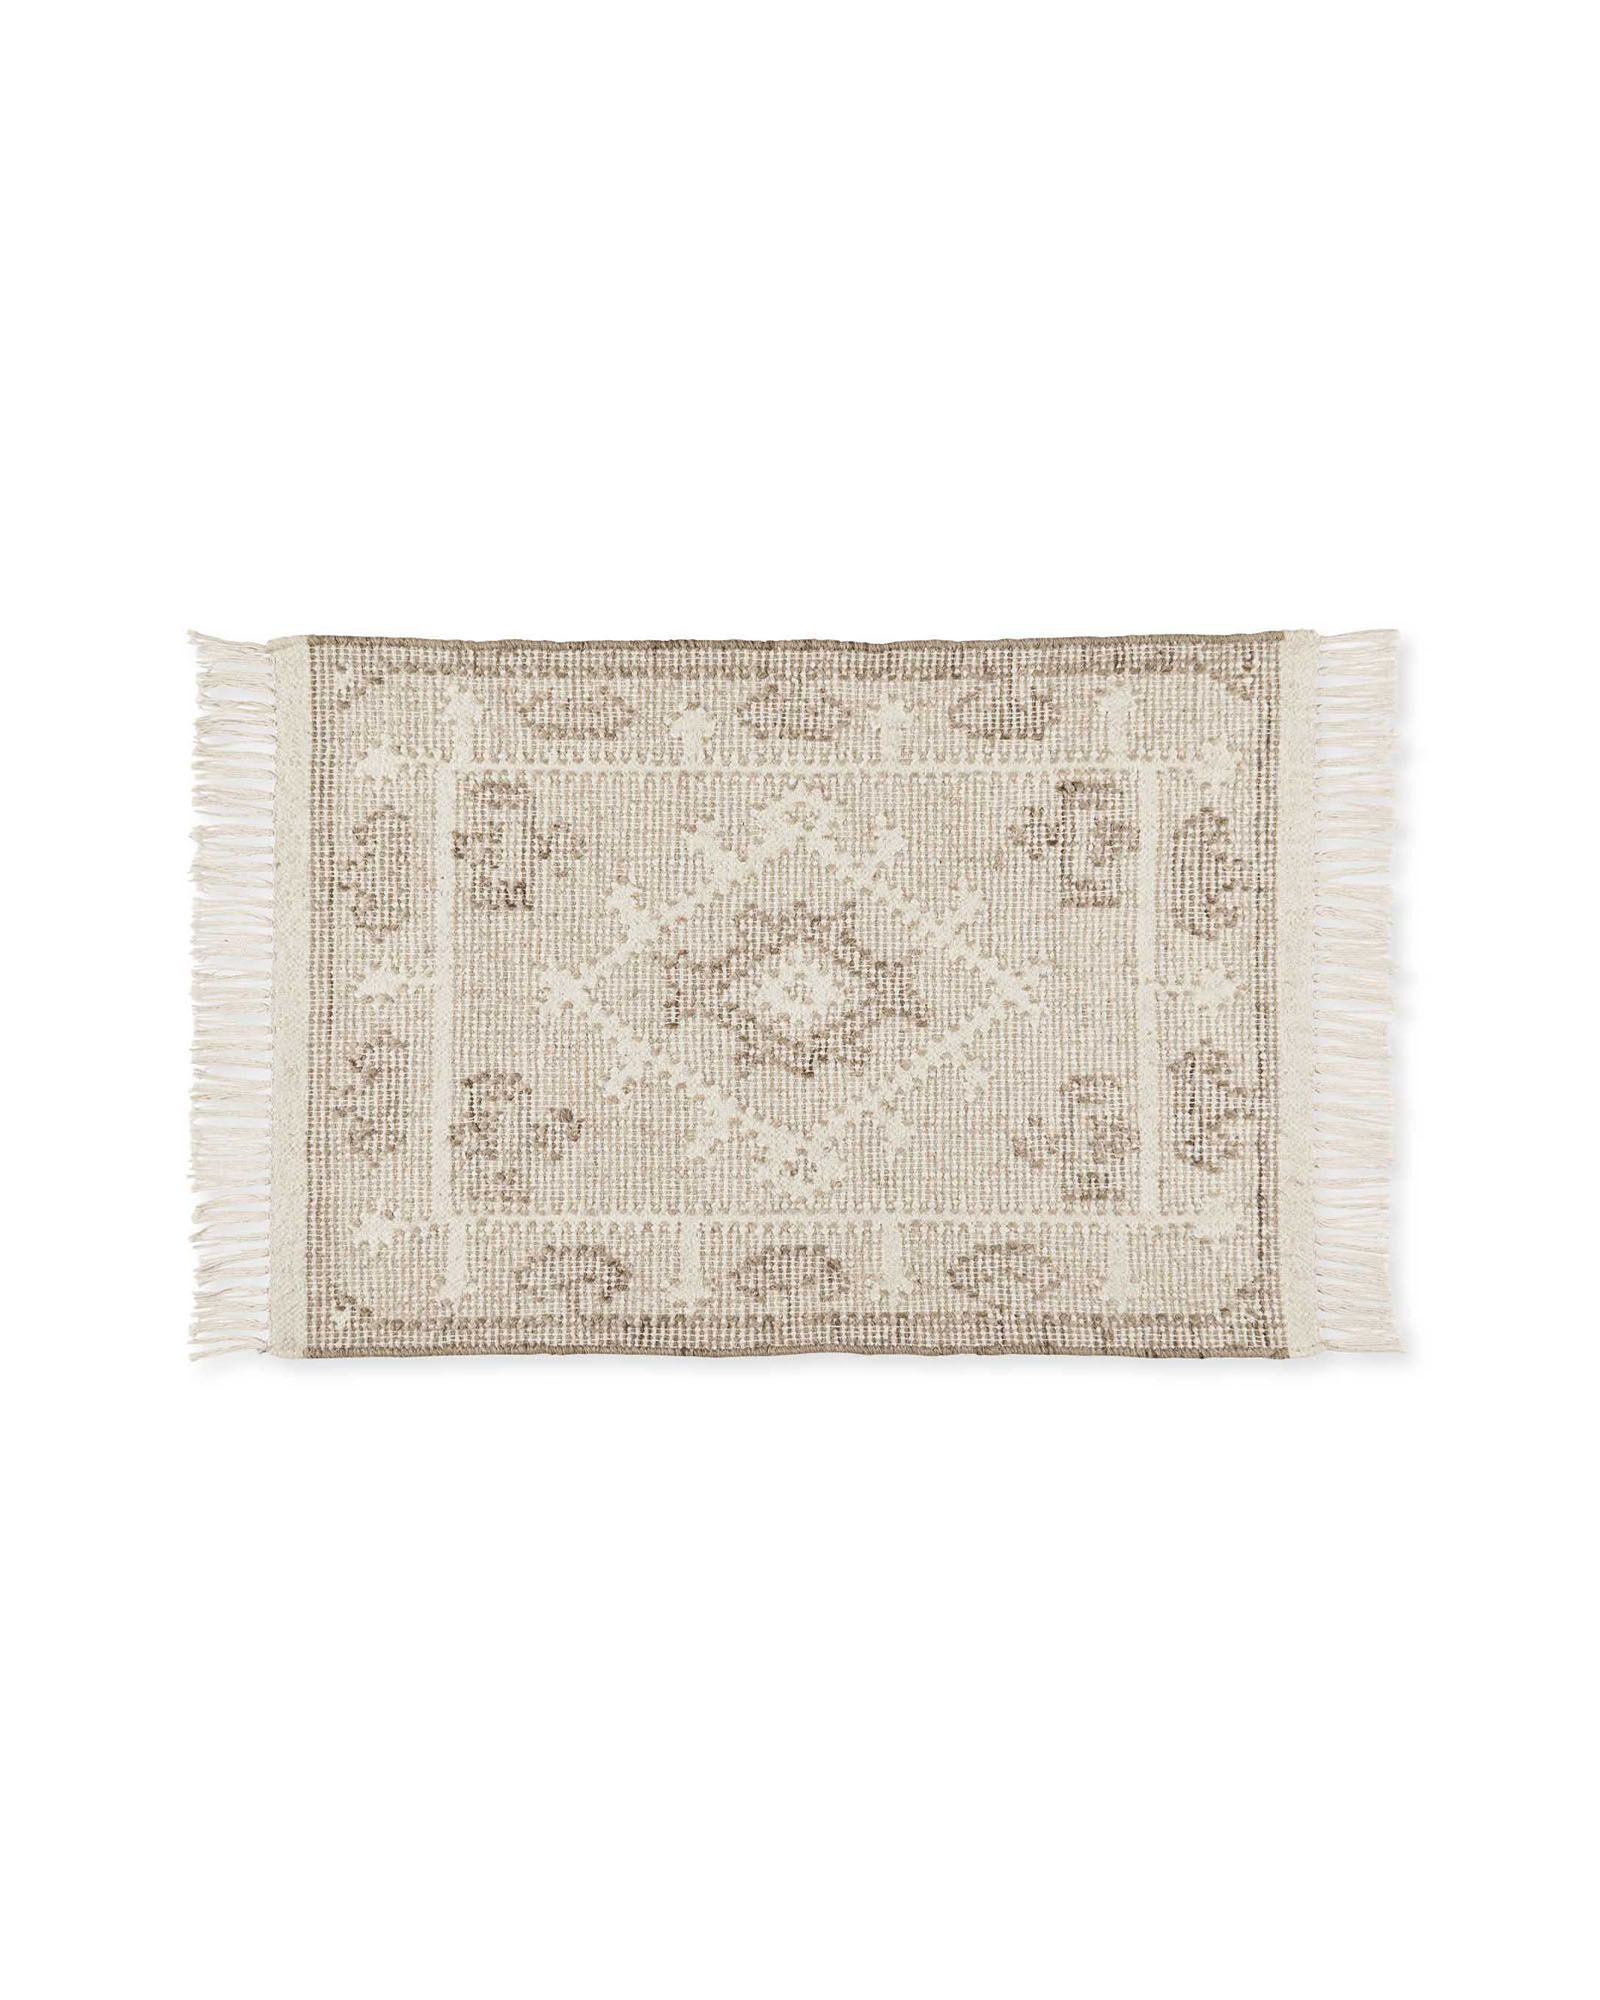 Alamere Rug | Serena and Lily